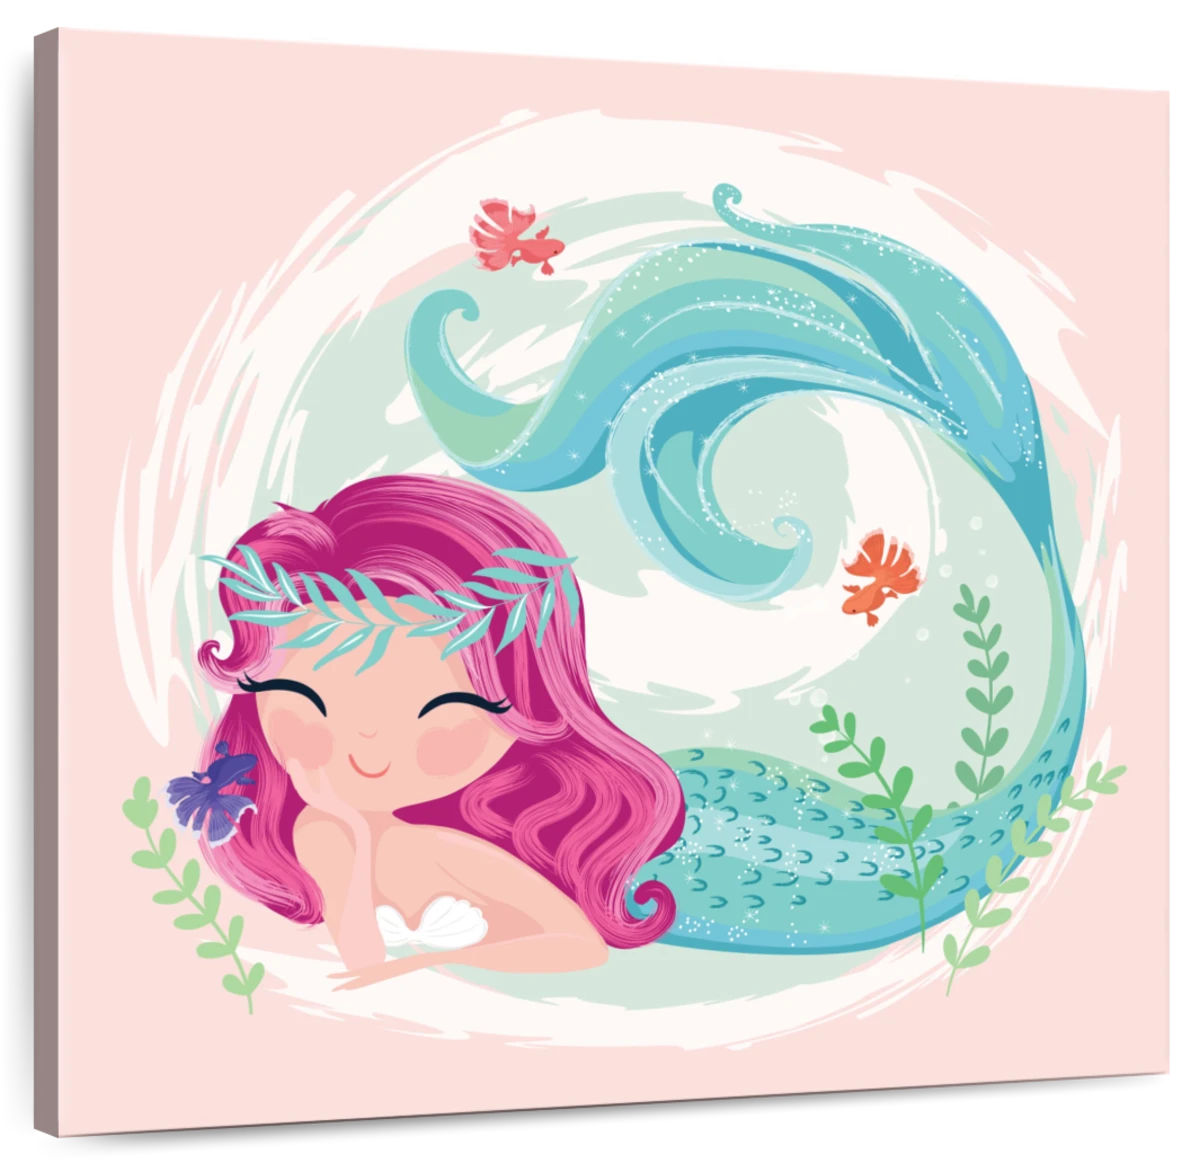 https://cdn.shopify.com/s/files/1/1568/8443/products/ycs_es_gte_layout_1_square_pink-haired-mermaid-wall-art.webp?v=1668637959